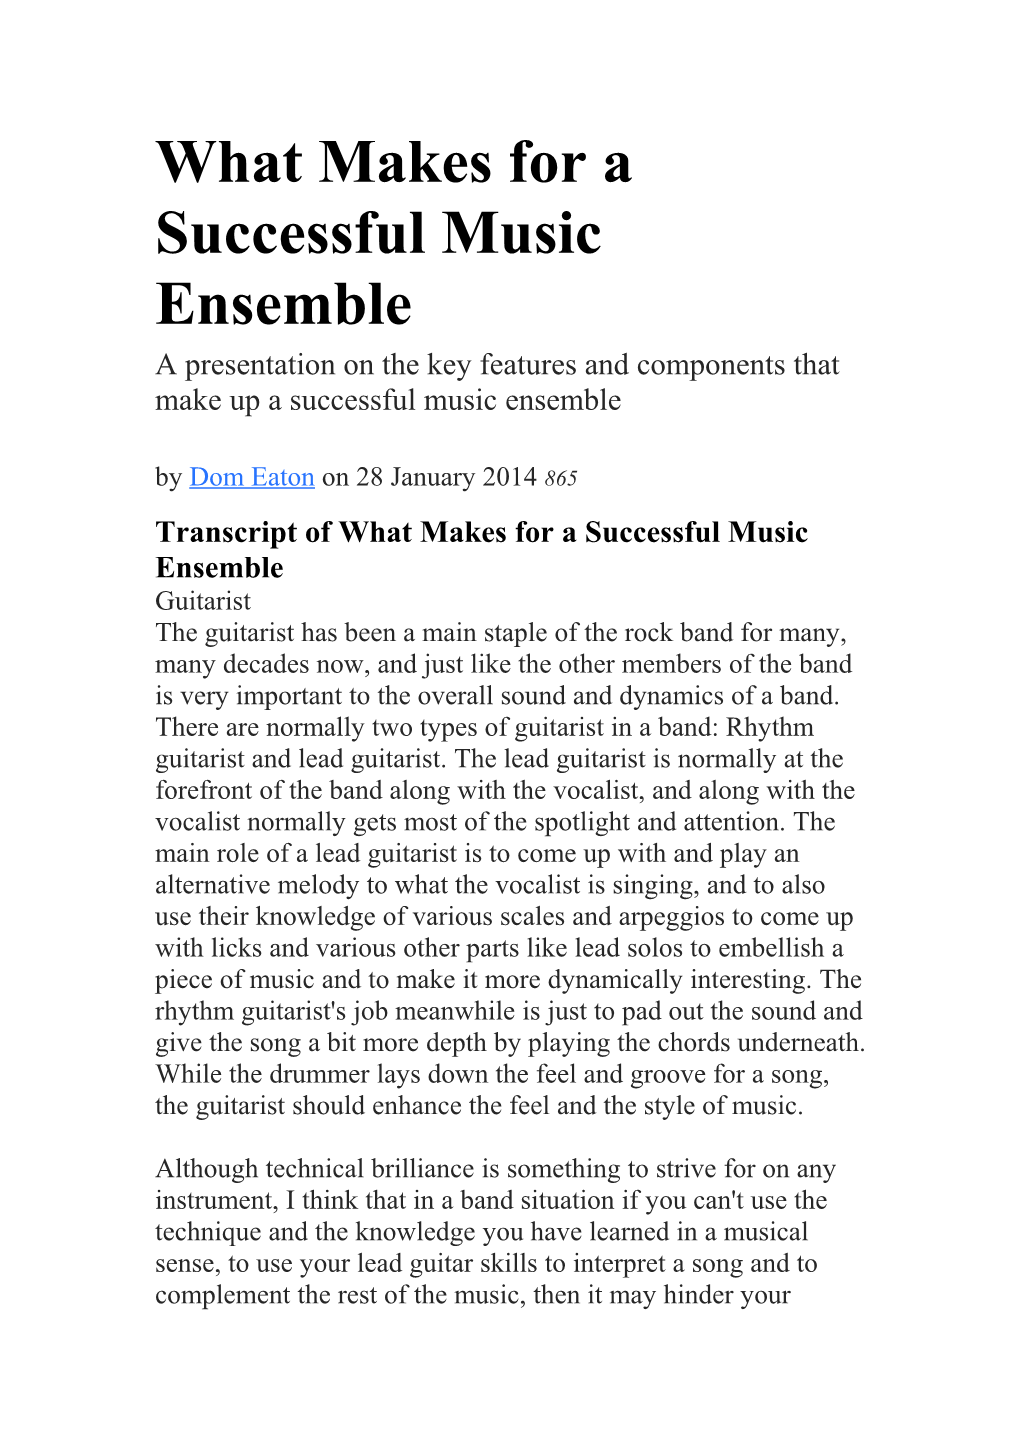 What Makes for a Successful Music Ensemble